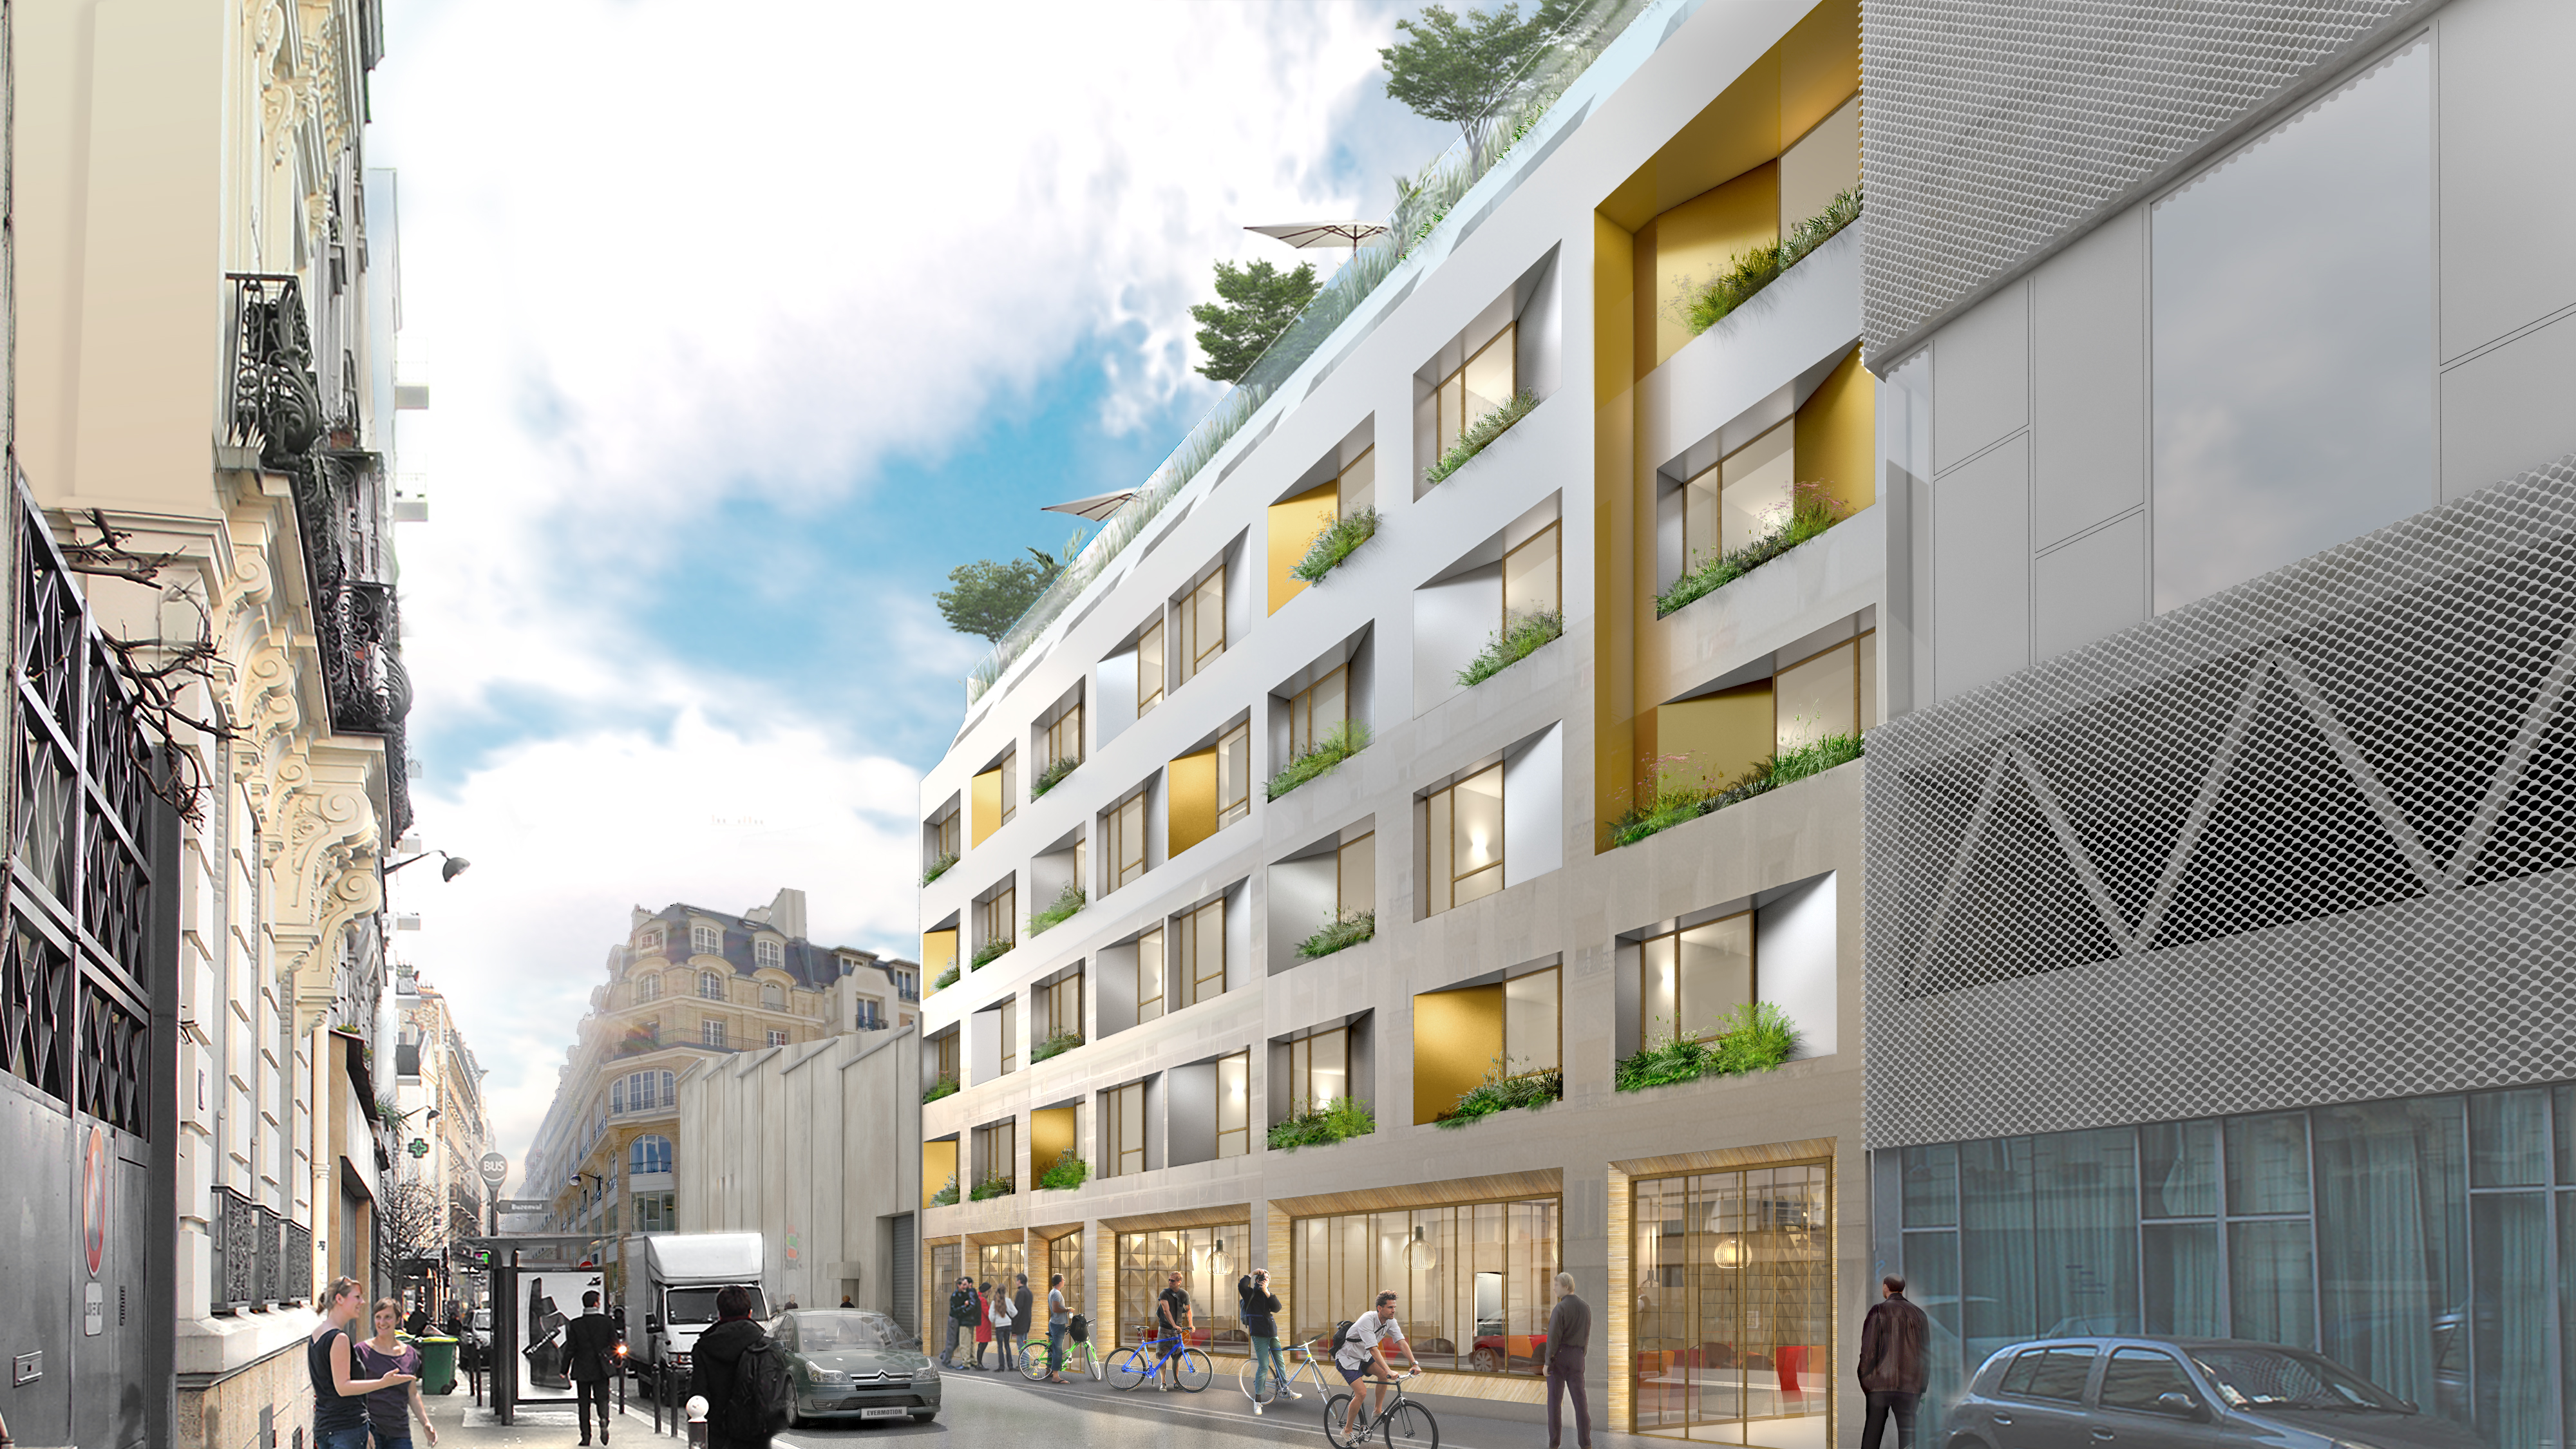 Novaxia acquired 61 Rue Buzenval to construct the first JoJoe Open House in Paris